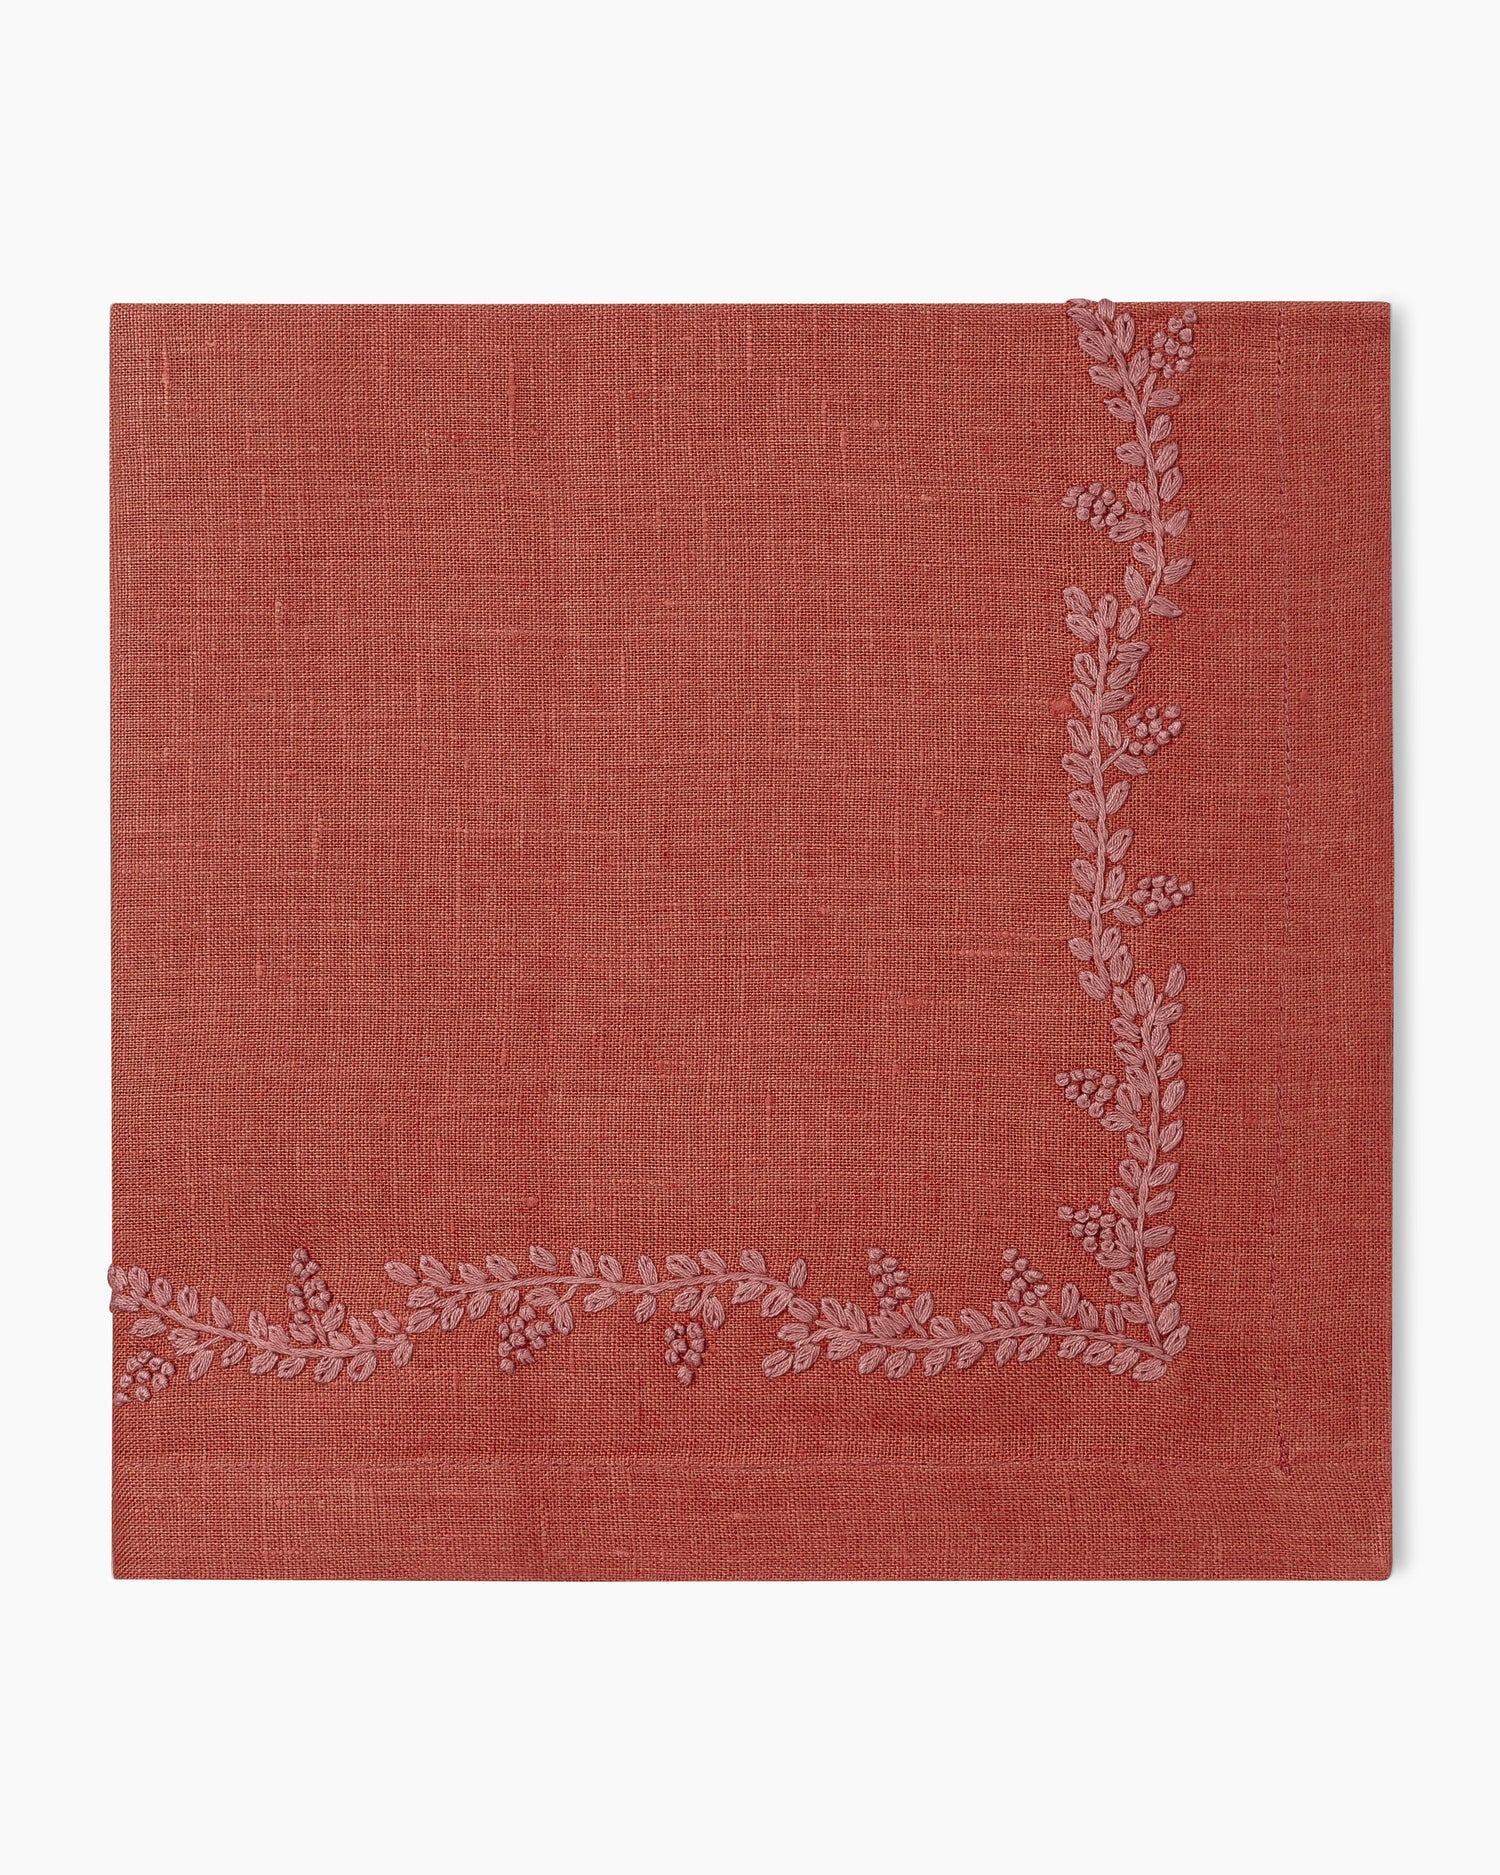 A Prism Vine Linen Dinner Napkin - 13 Colors with a floral pattern by Henry Handwork in table linens.